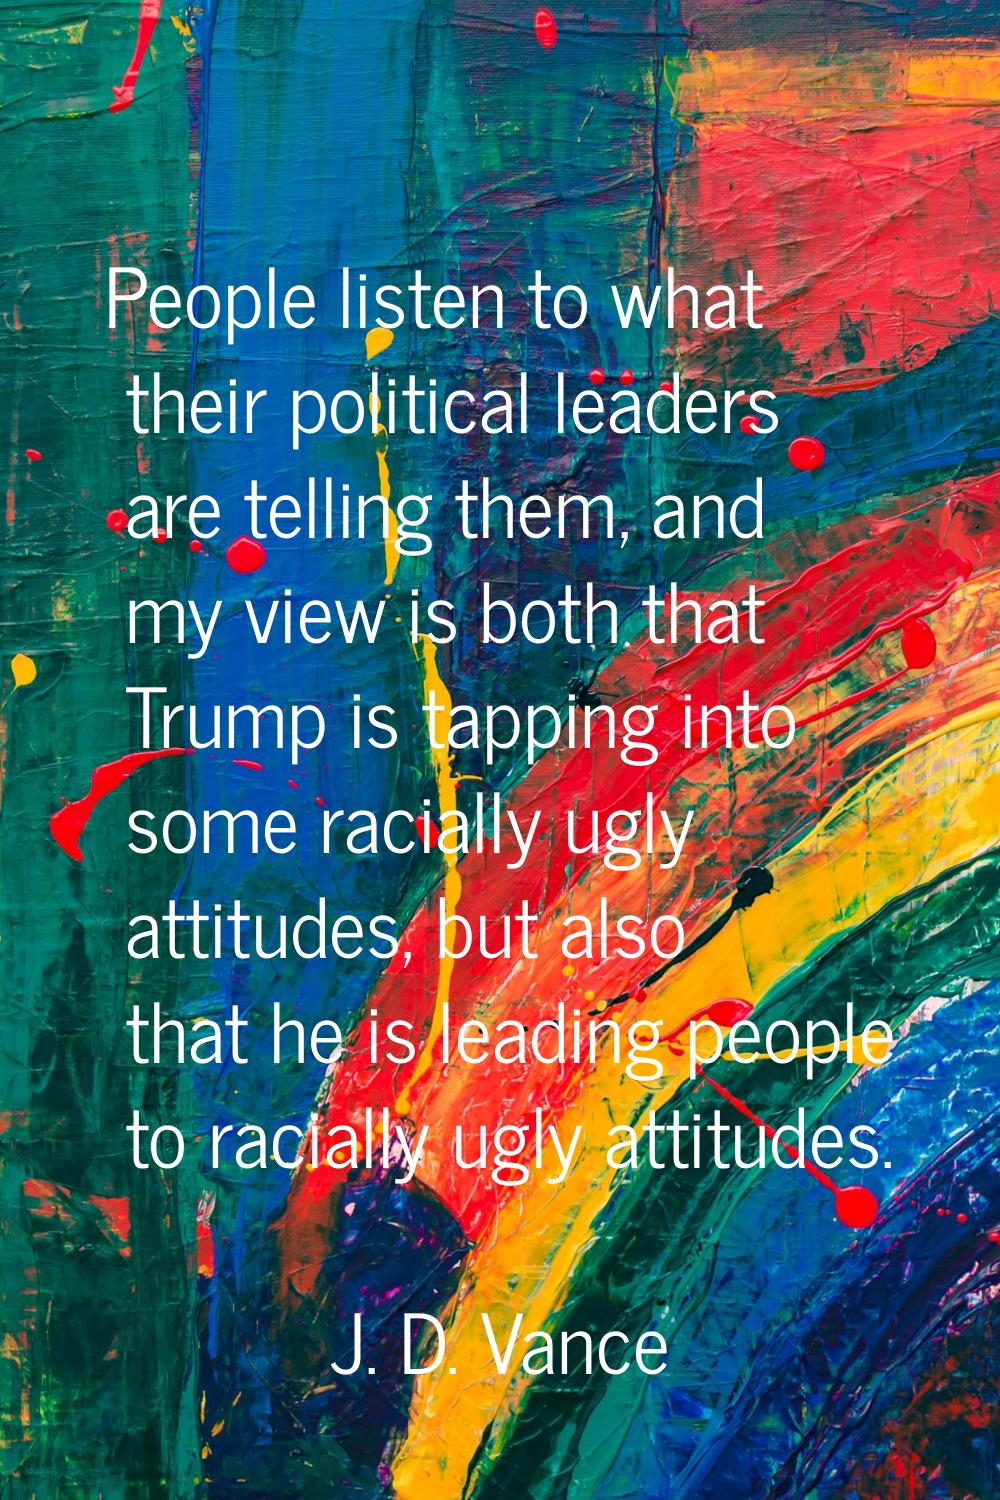 People listen to what their political leaders are telling them, and my view is both that Trump is t